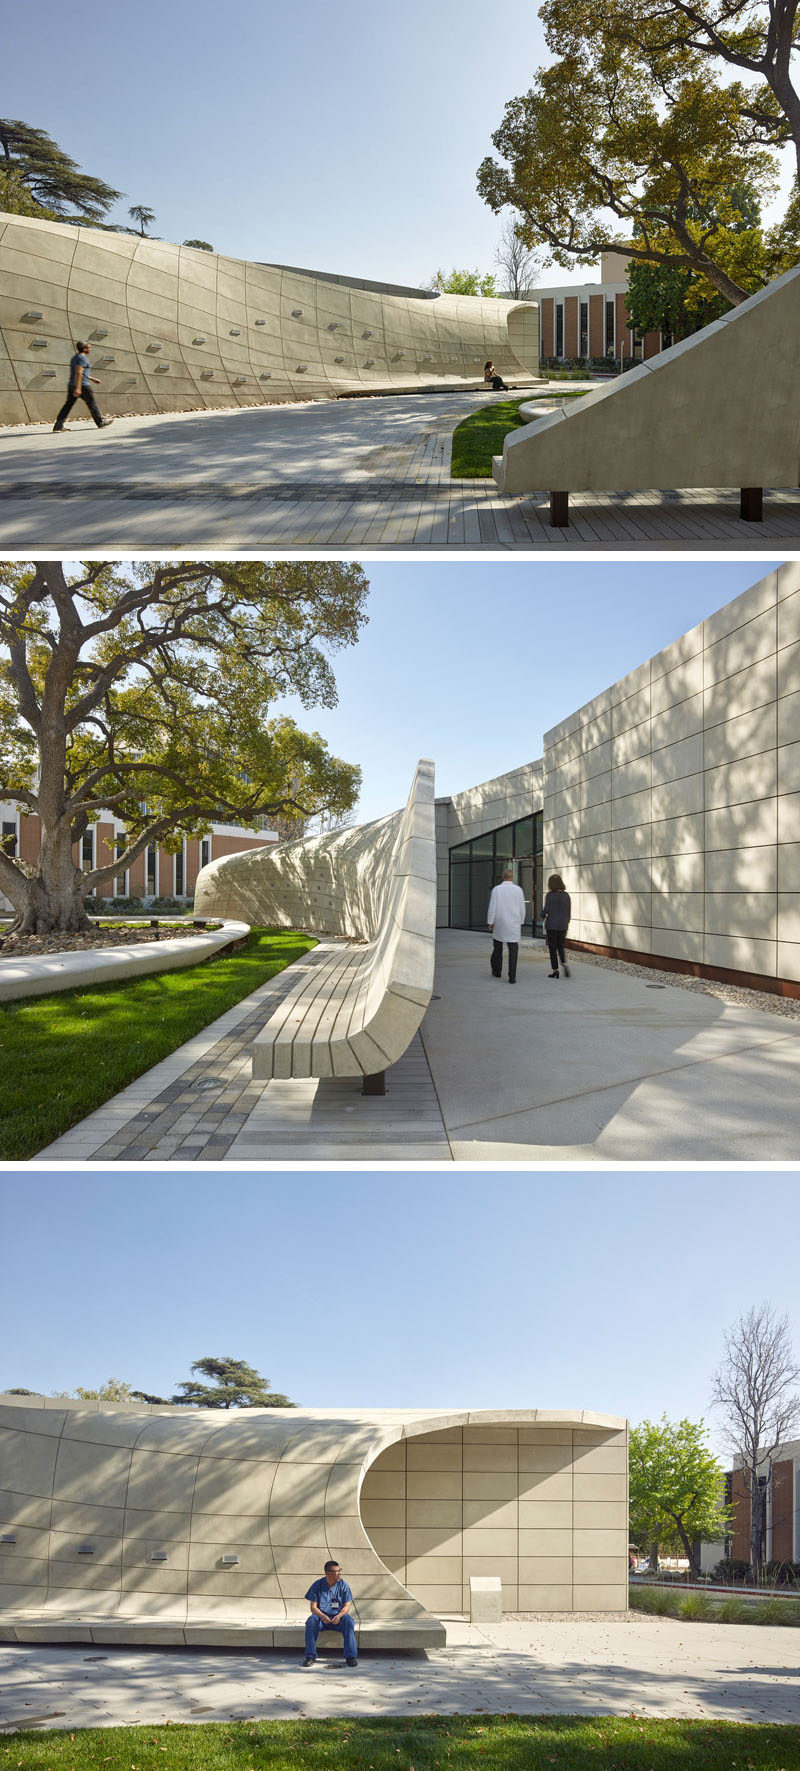 Belzberg Architects Have Designed A Serene Outdoor Sanctuary With Sculptural Concrete Seating